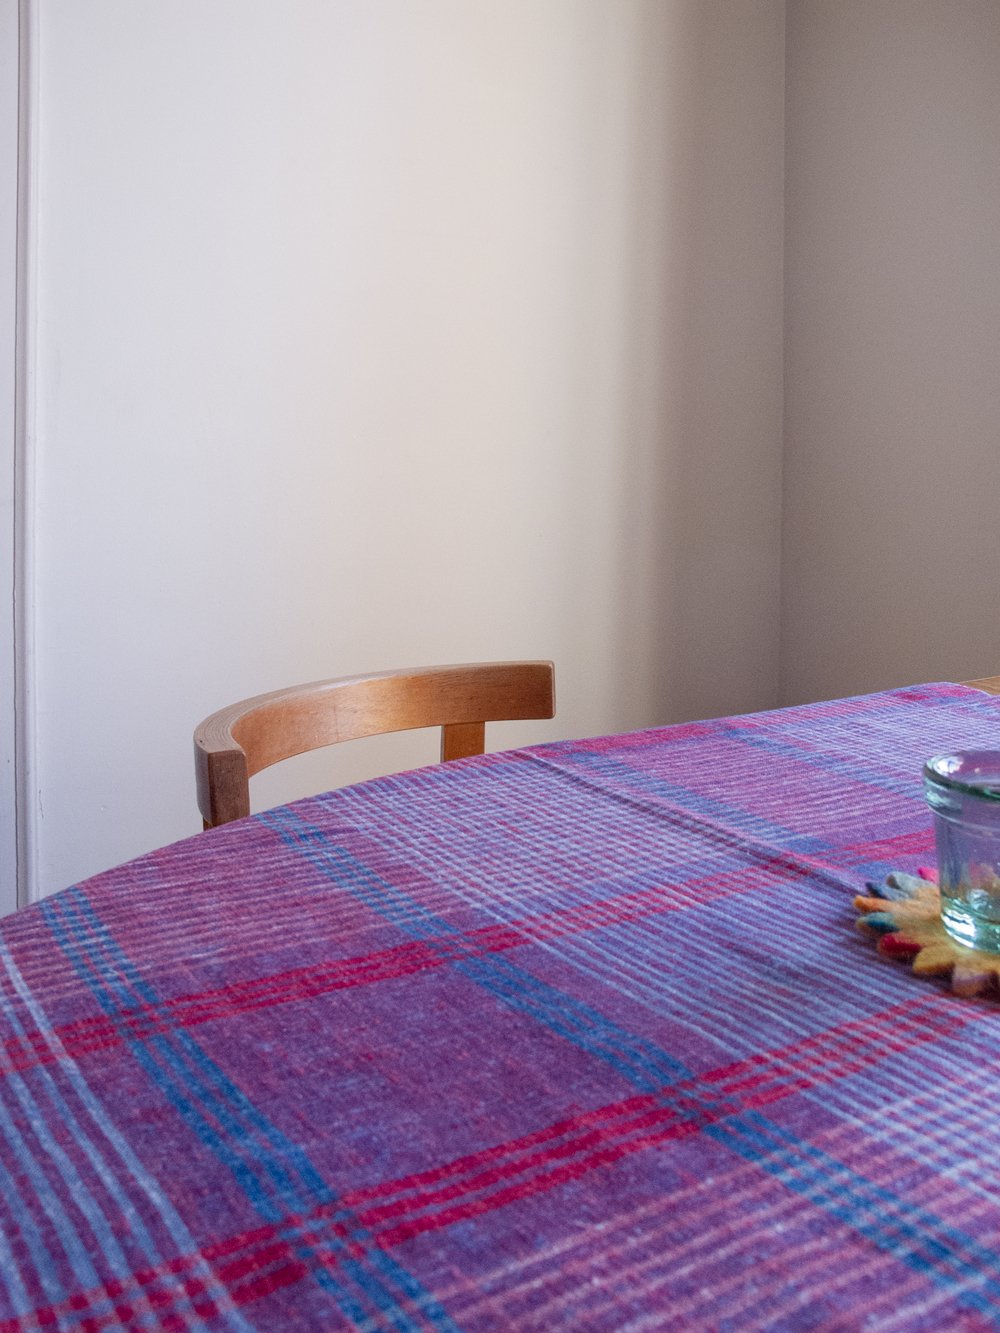 Image of gingham tablecloth